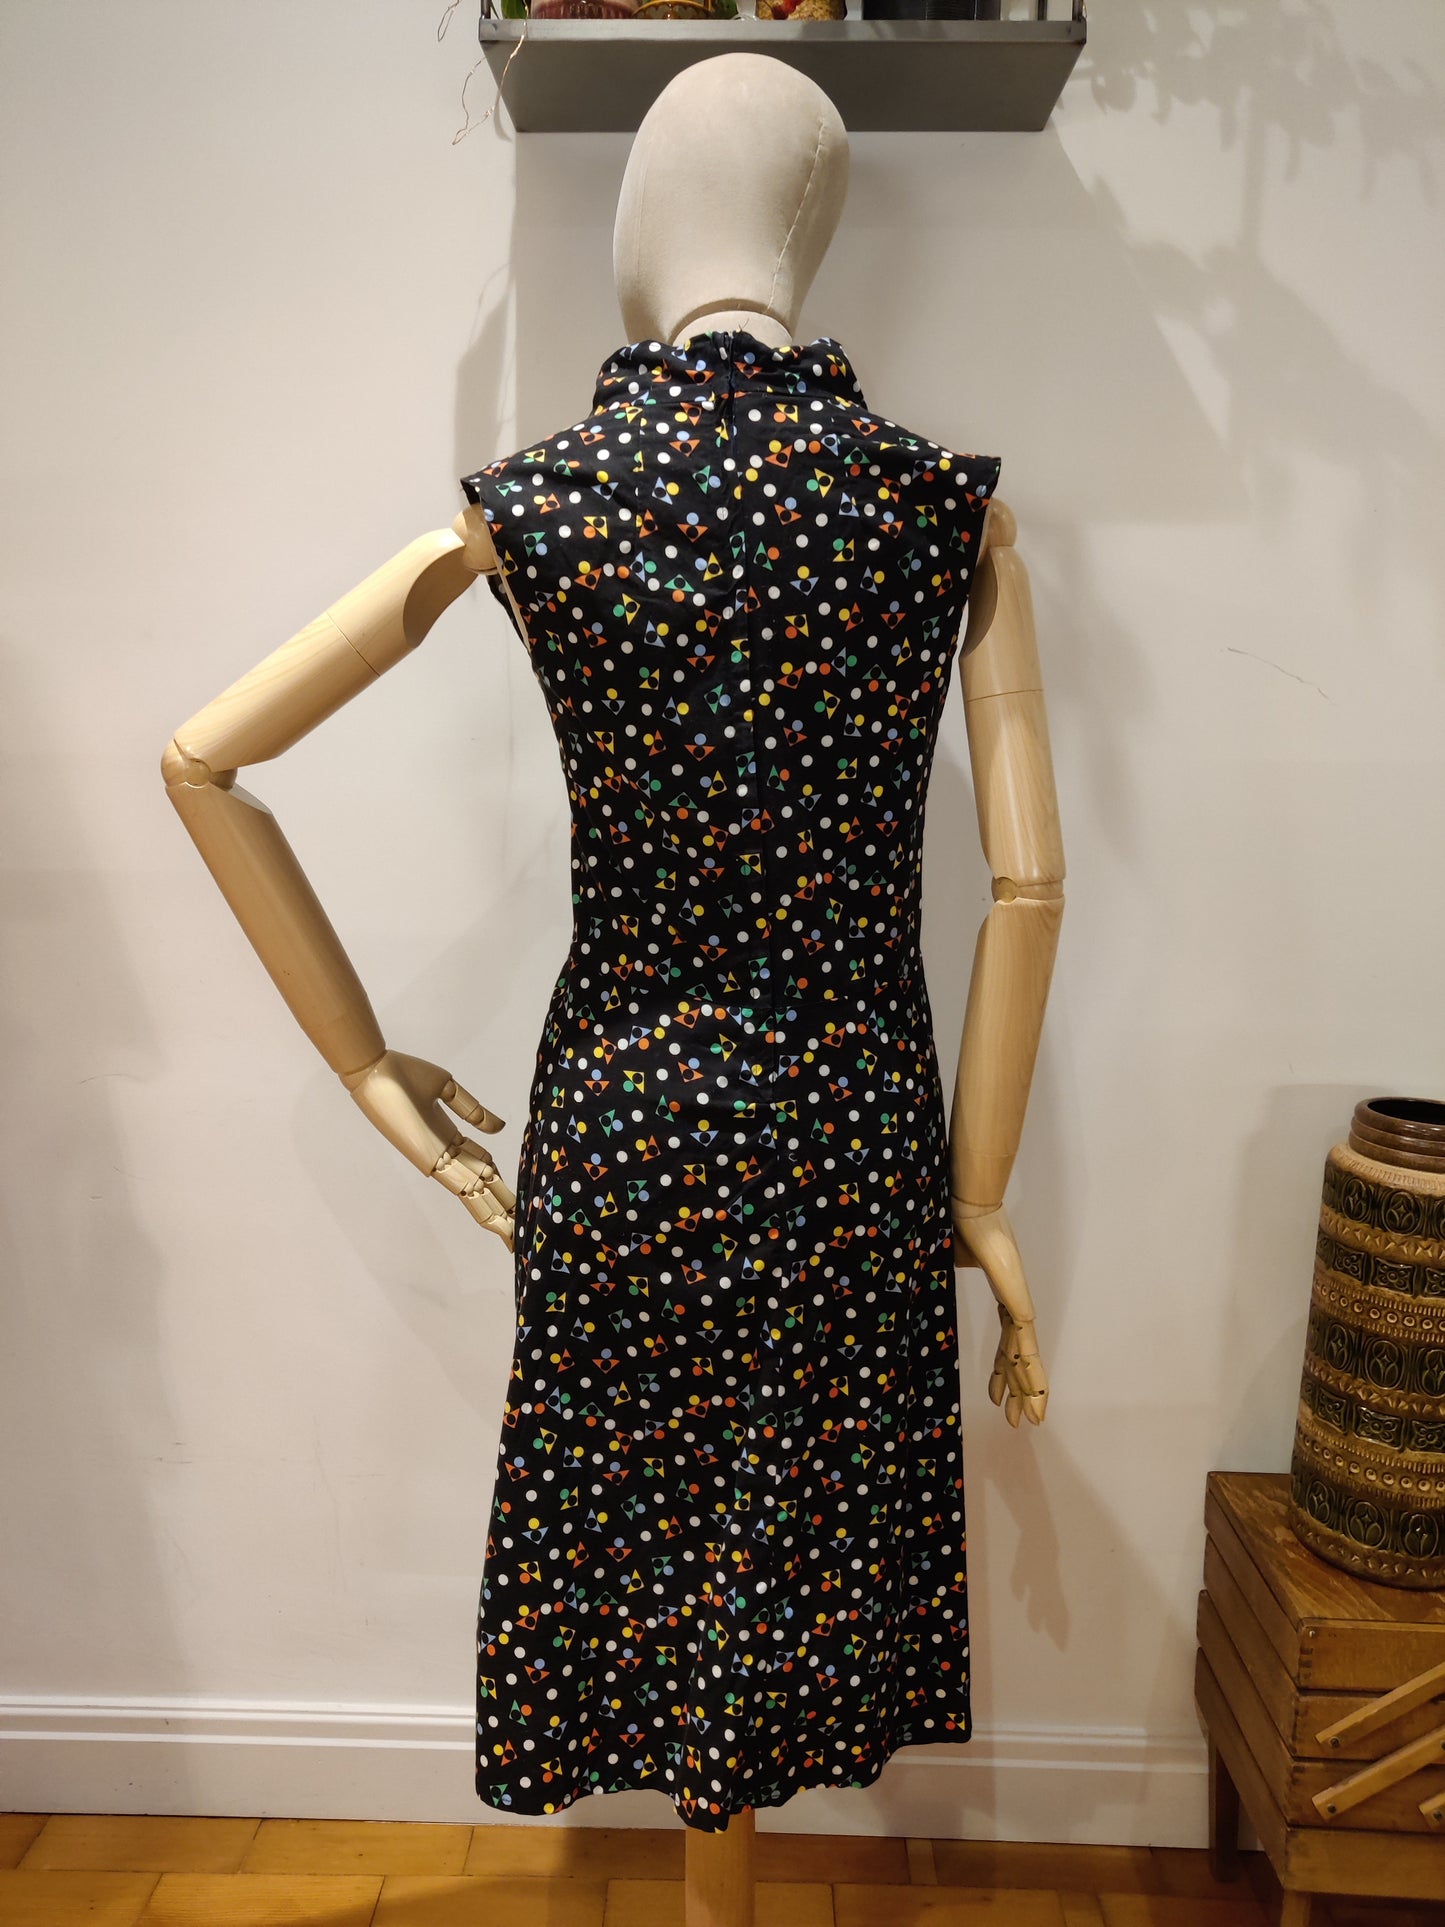 Colourful and fun vintage dress with high neck.